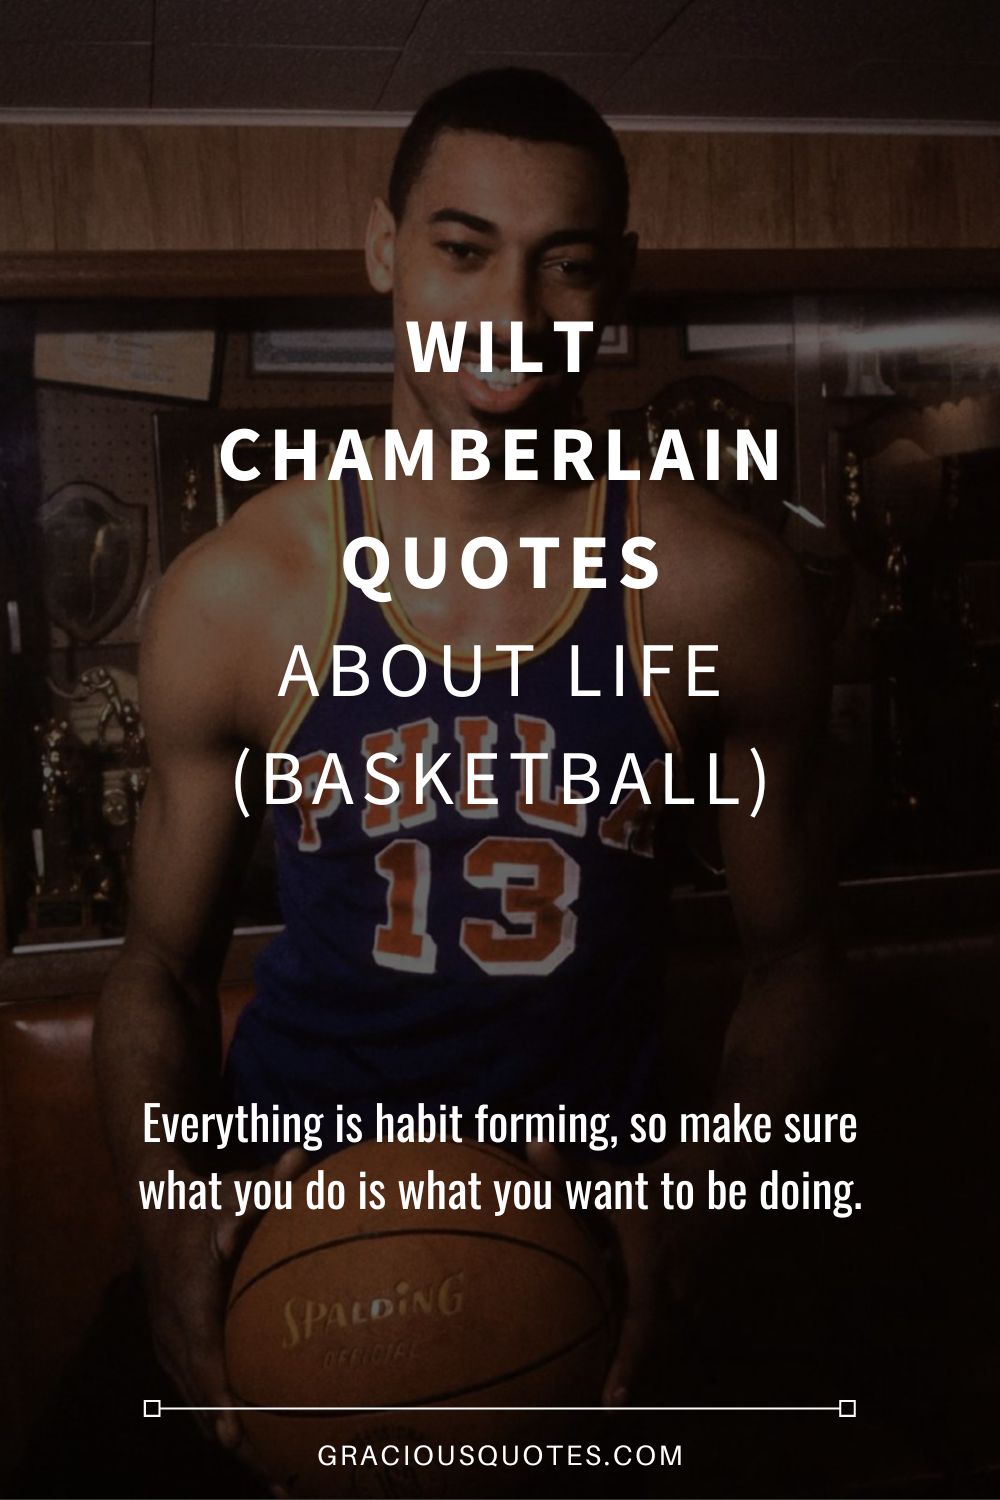 Wilt Chamberlain Quotes About Life (BASKETBALL) - Gracious Quotes